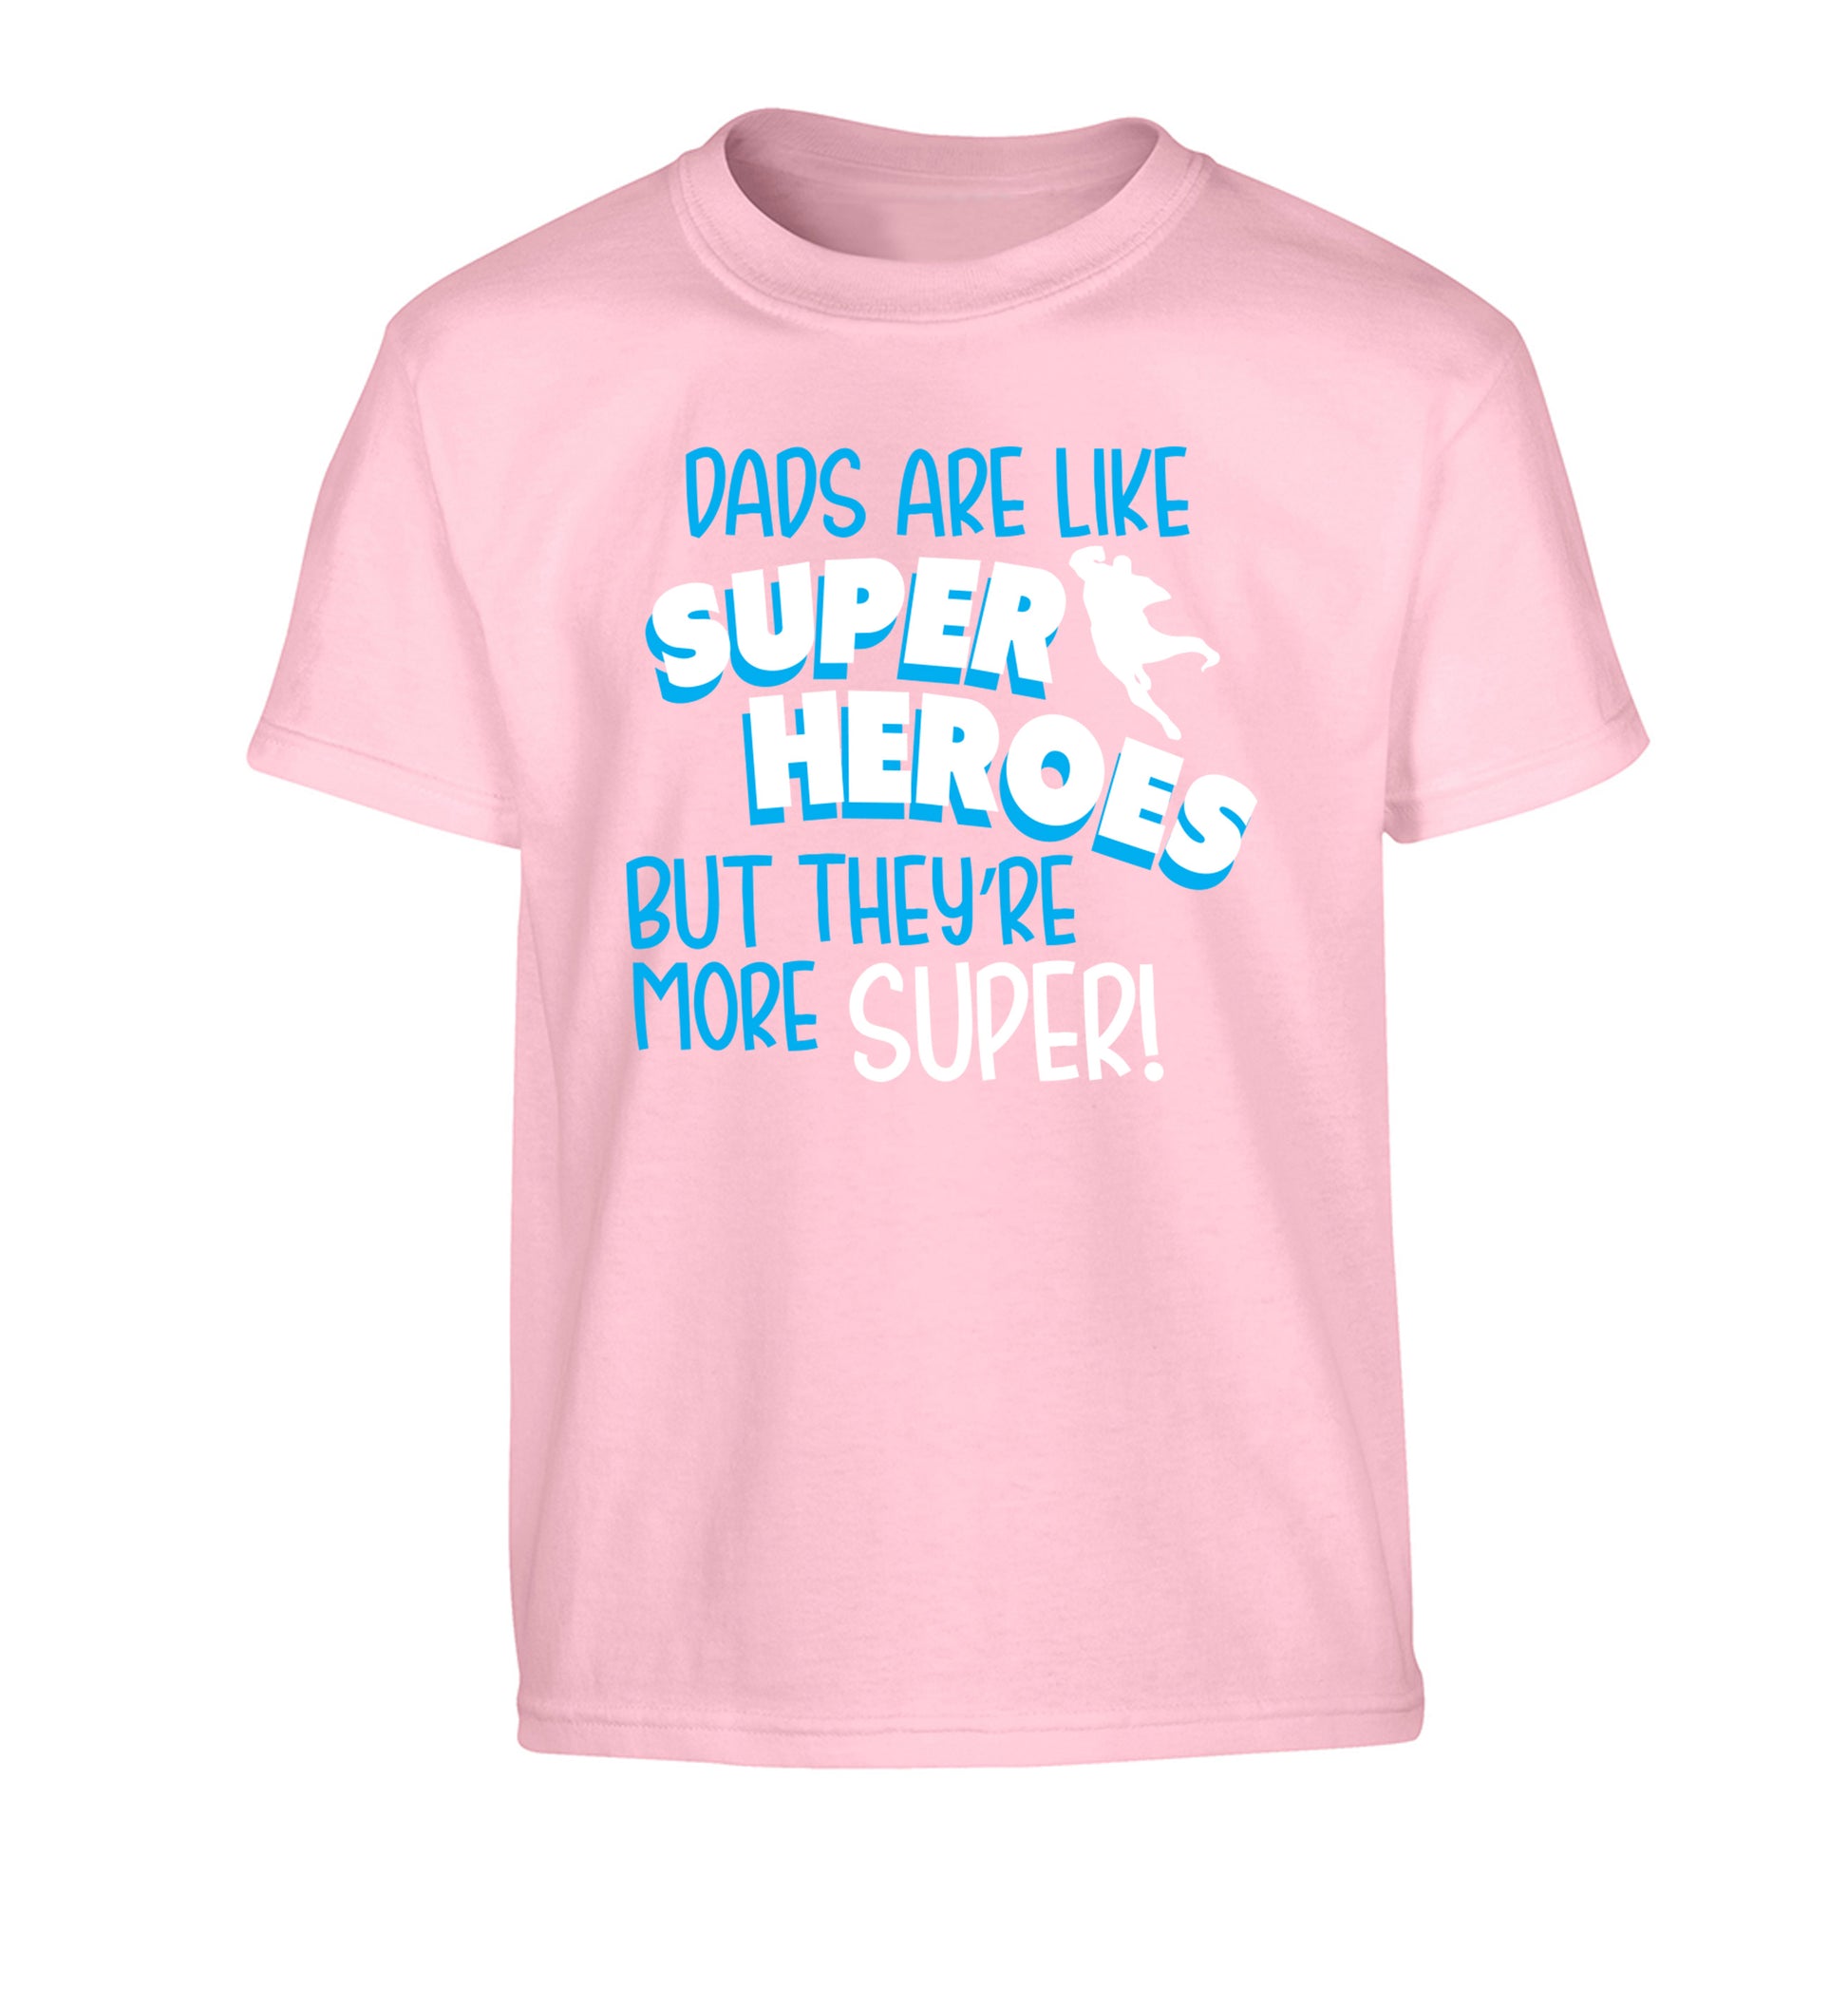 Dads are like superheros but they're more super Children's light pink Tshirt 12-13 Years